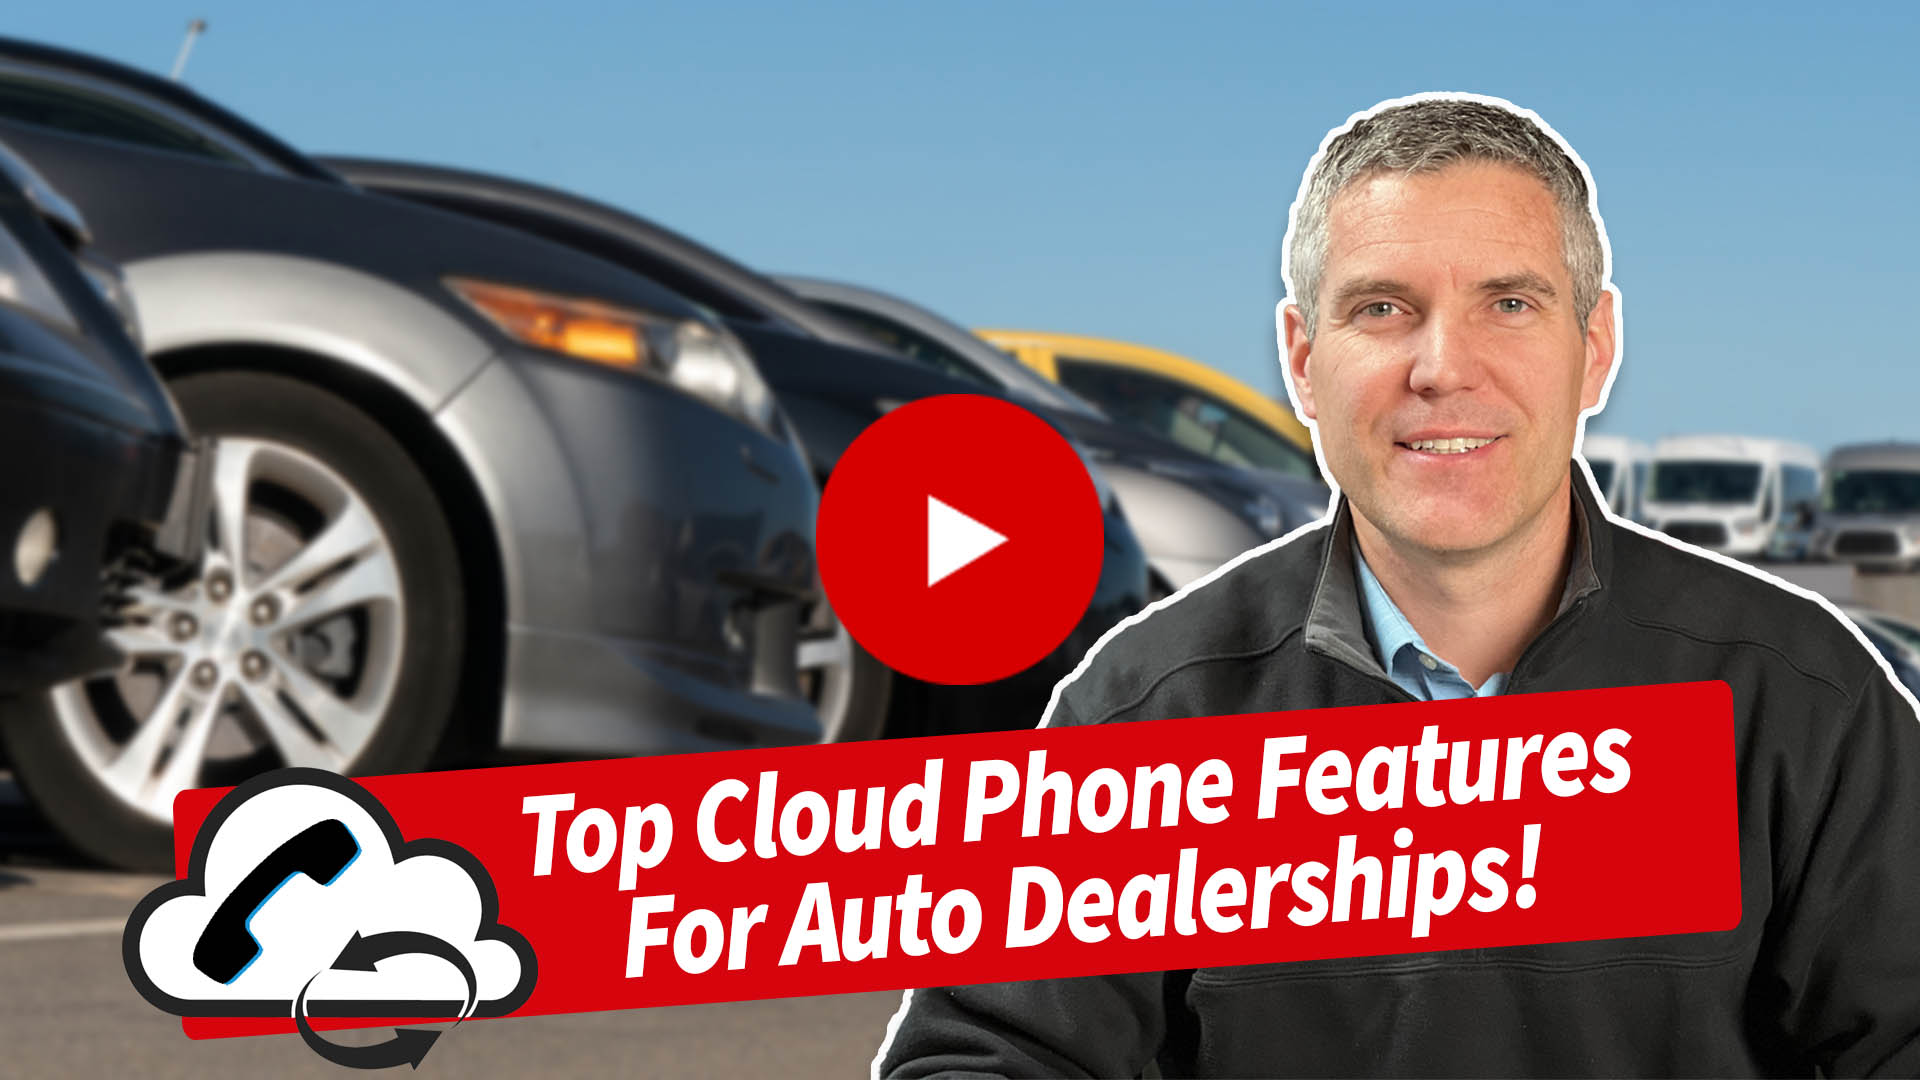 Top Cloud Phone Features For Auto Dealerships